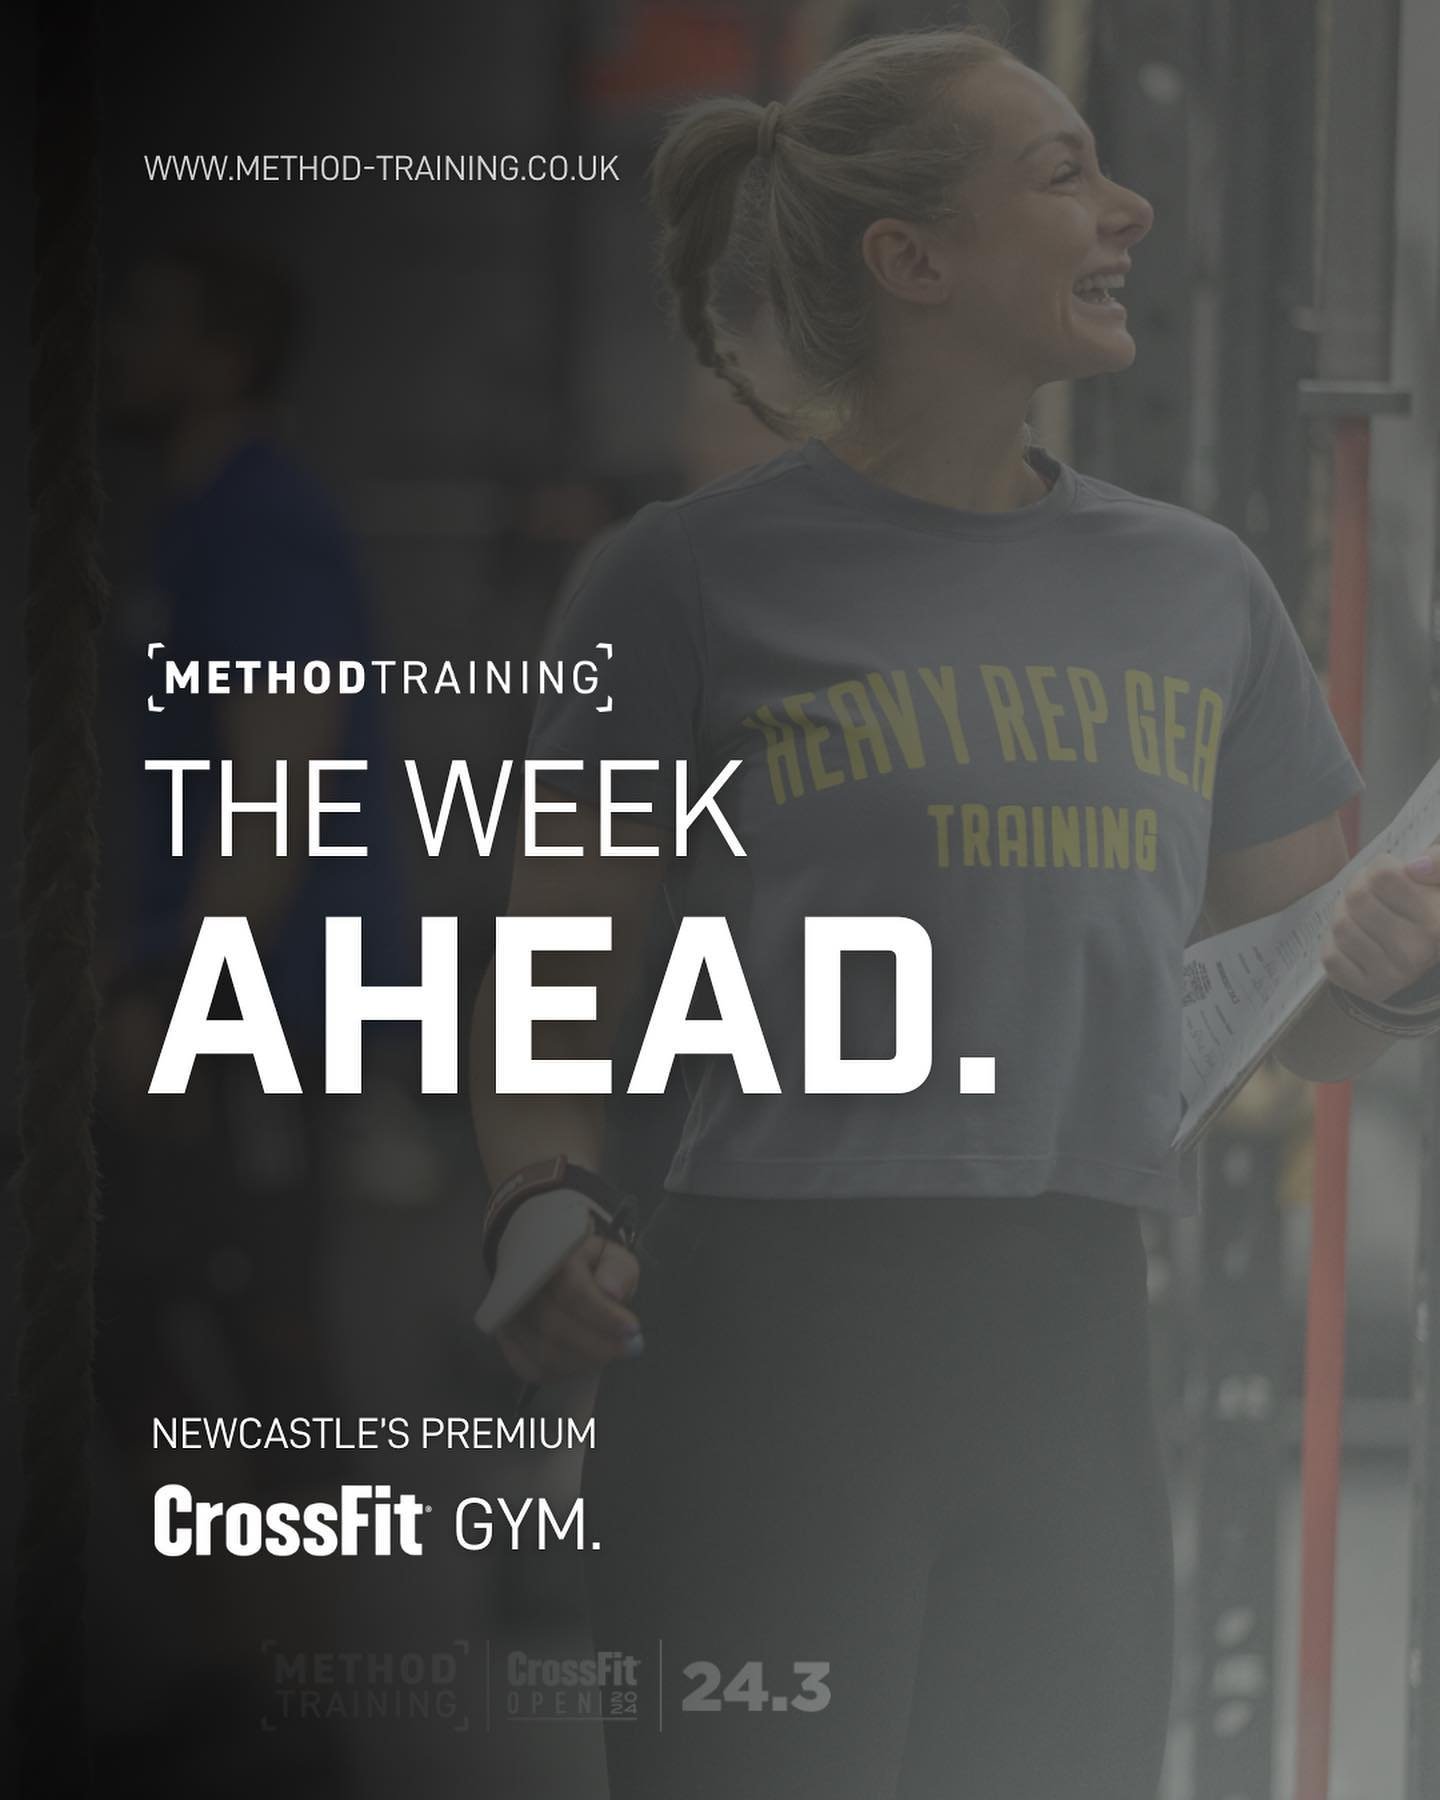 Your week ahead at Method Training. 

Swipe to see what&rsquo;s in store for the upcoming week &lt;&lt;&lt;&lt;